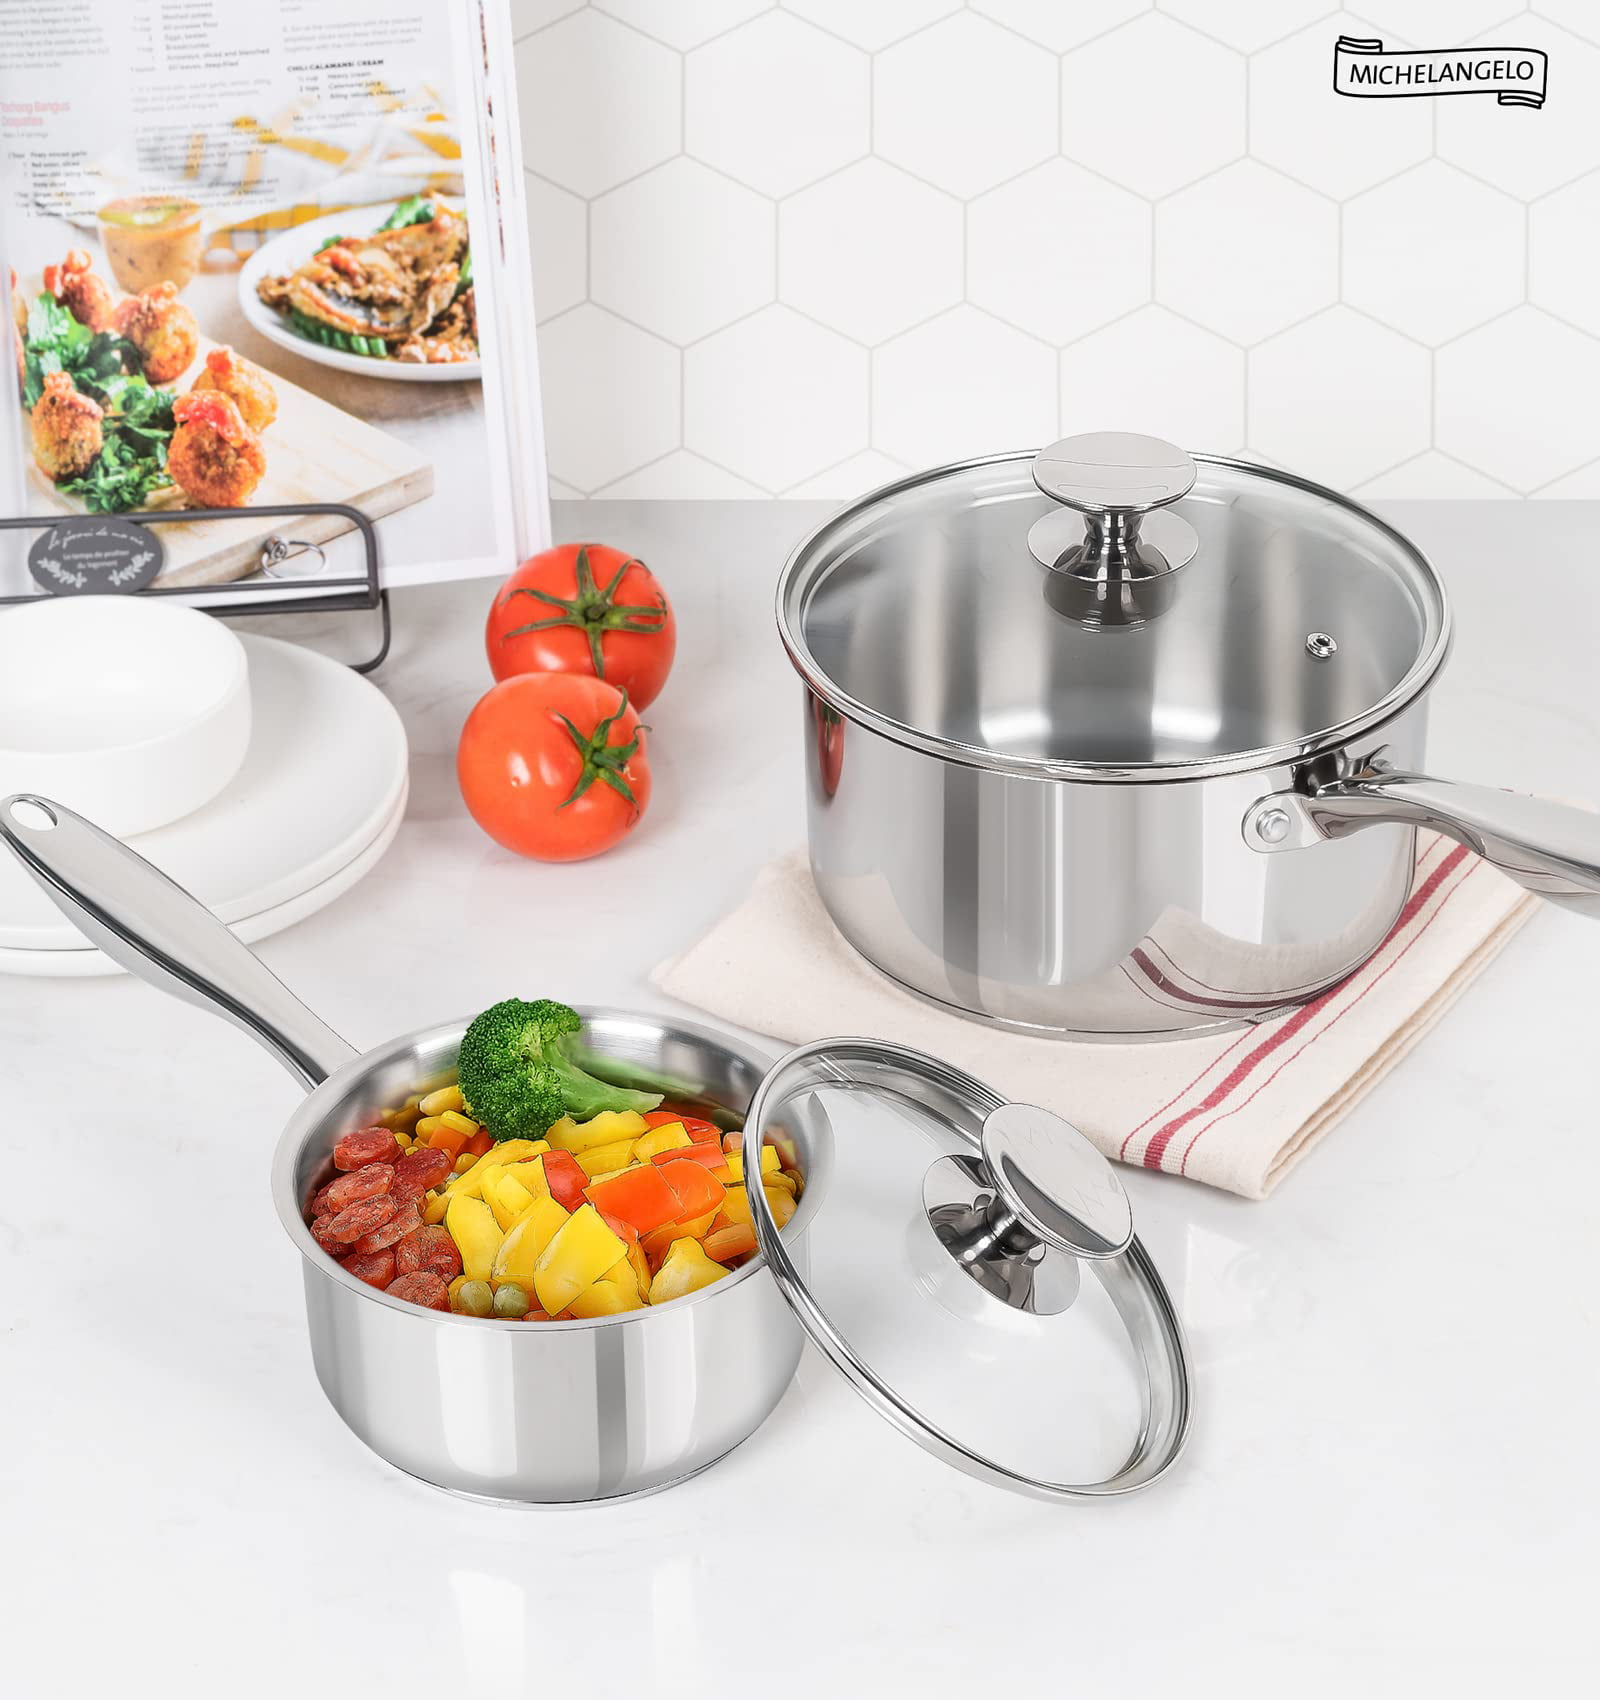 MICHELANGELO 3 Quart Saucepan with Lid, Nonstick Ceramic Sauce Pan with  Stainless Steel Handle, 3 Qt Saucepan with Lid Induction Compatible, Oven